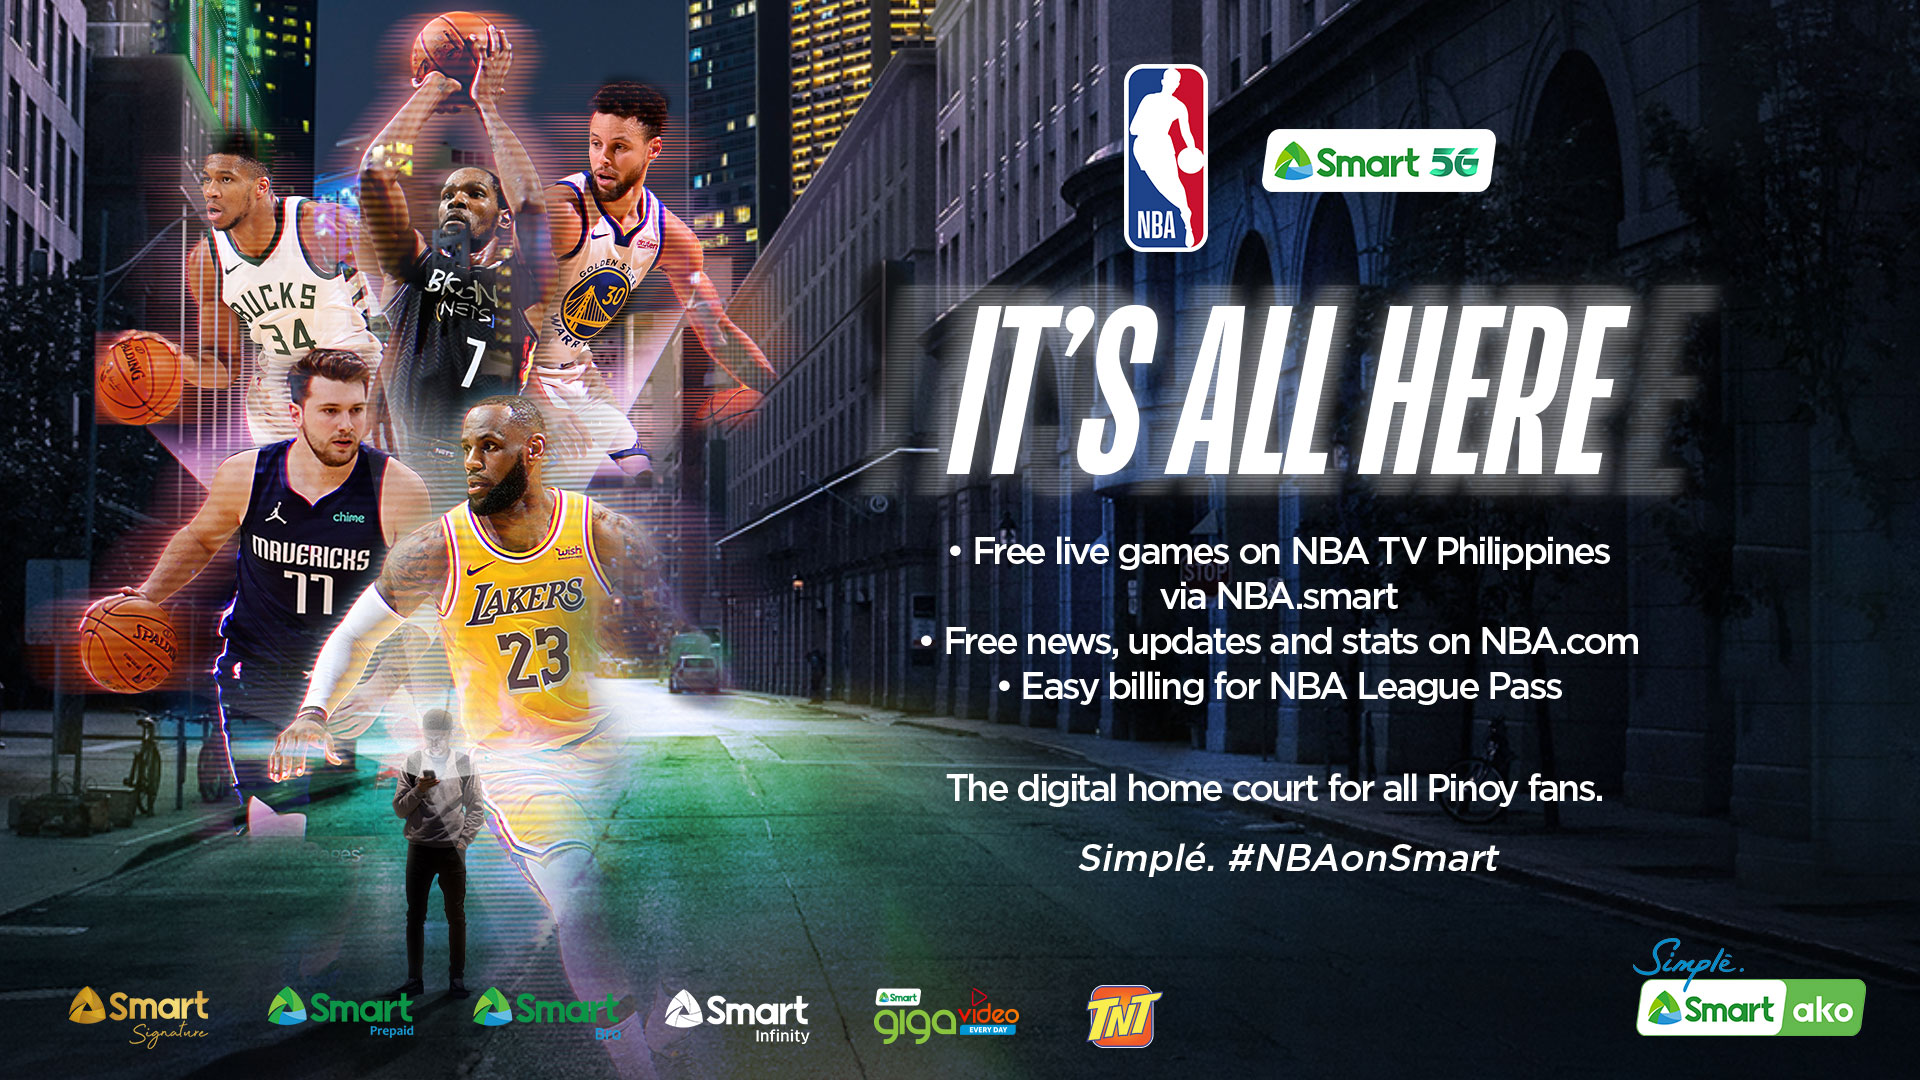 ItsAllHere NBA and Smart launch NBAs official digital destination in the Philippines - Benteuno